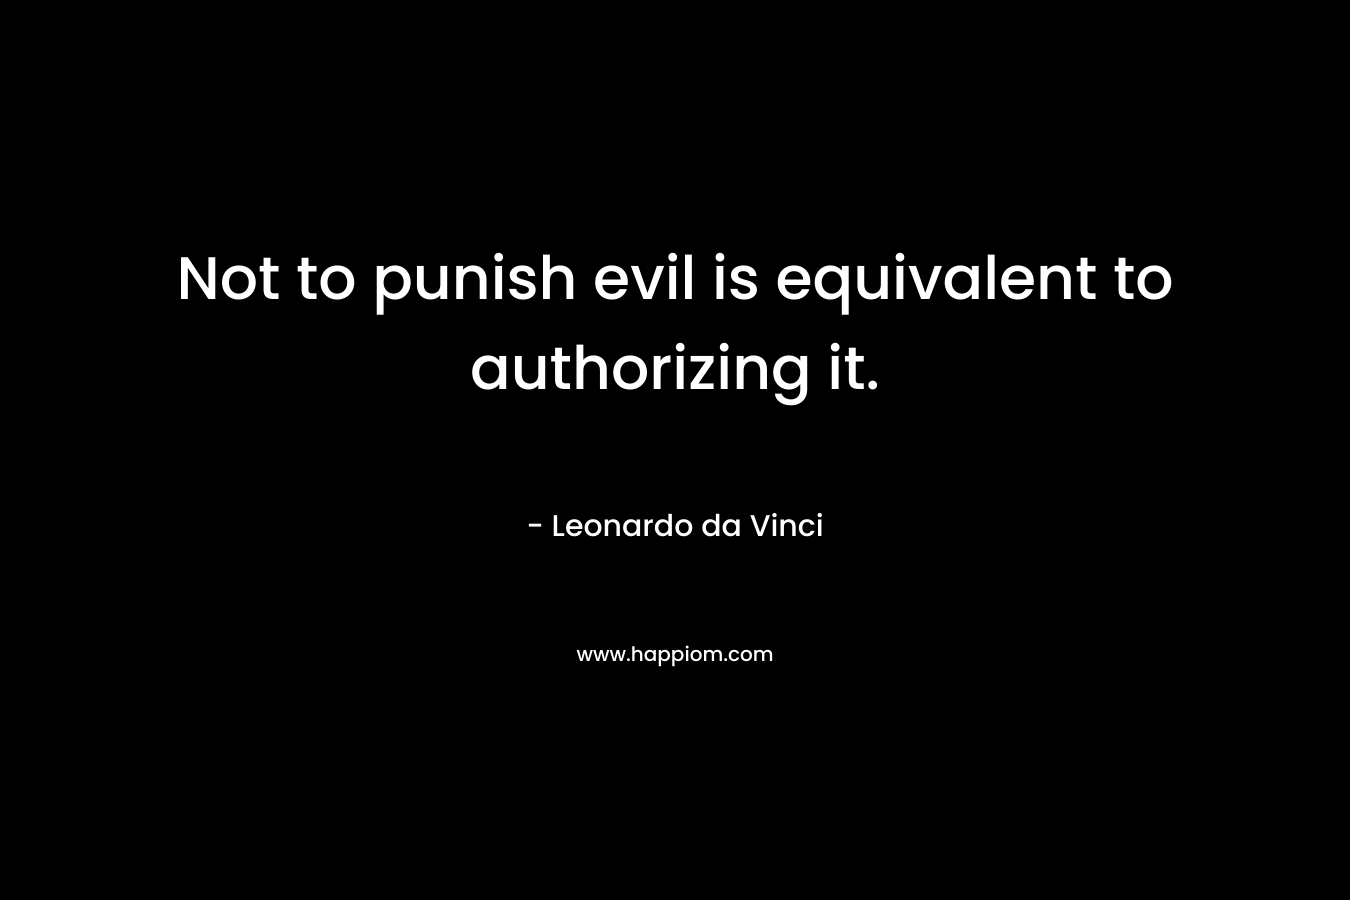 Not to punish evil is equivalent to authorizing it.